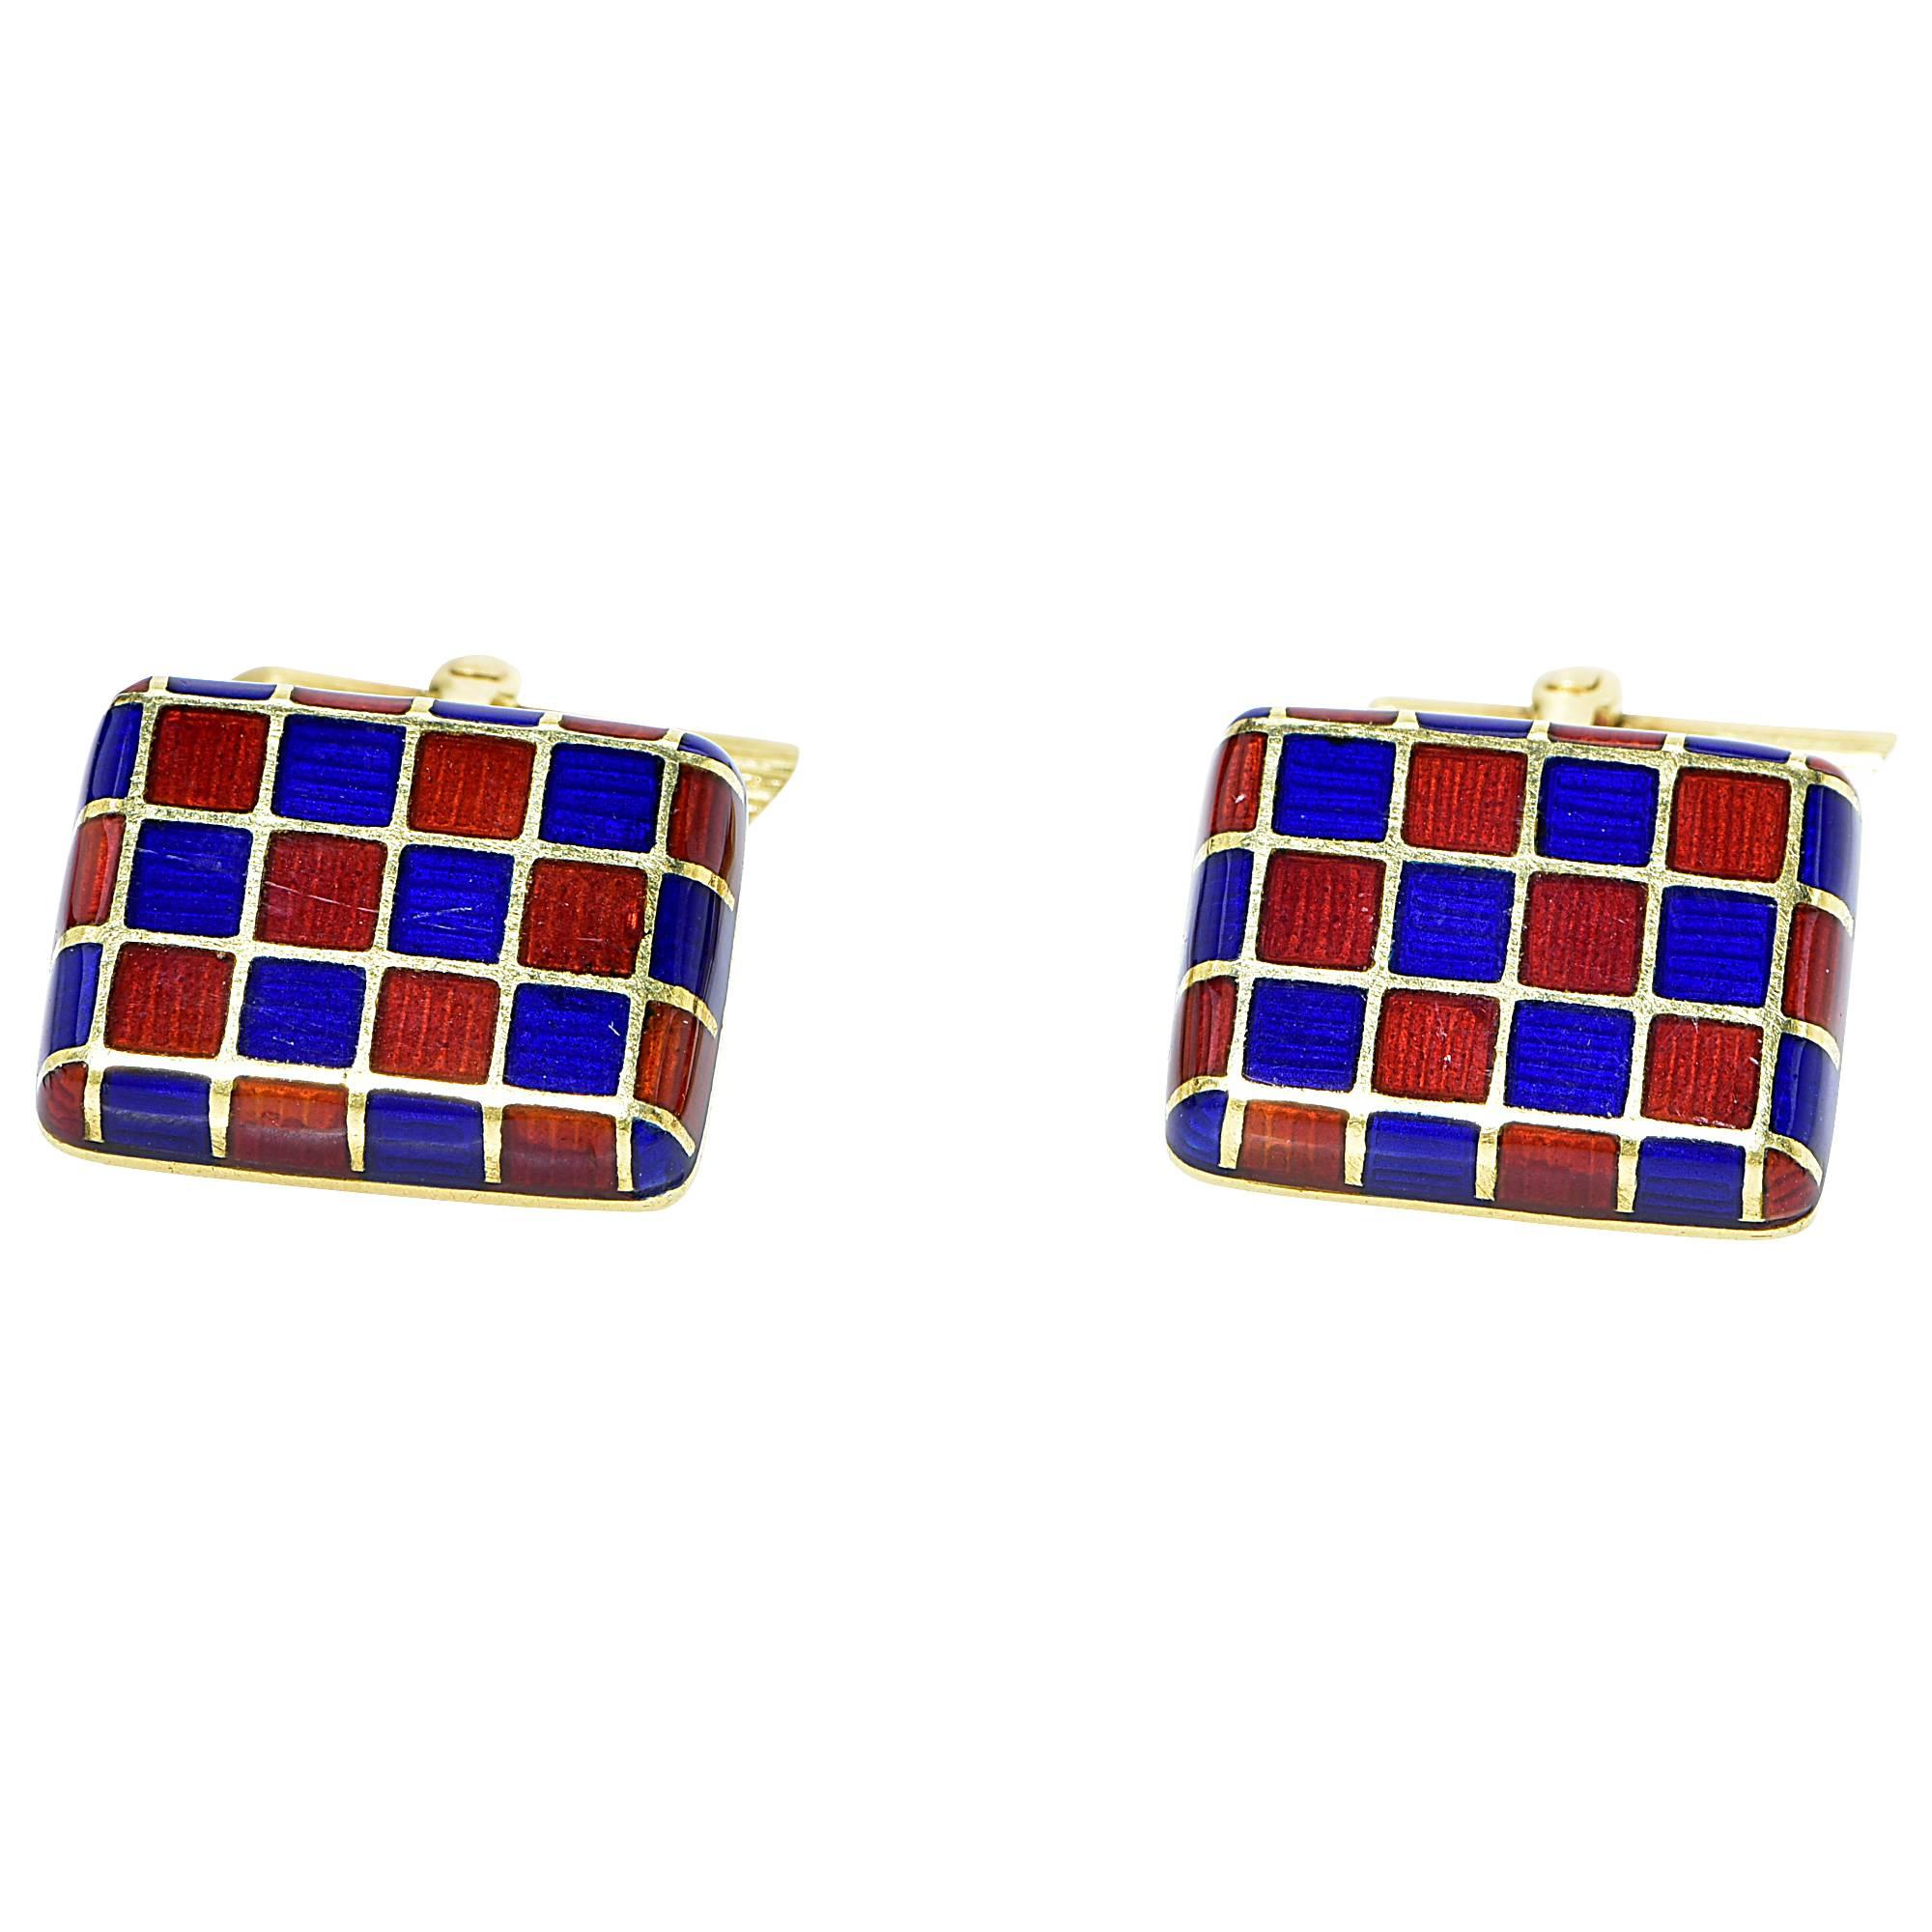 18k yellow gold vintage enamel cuff links.

Metal weight: 16.79 grams

These enamel cuff links are accompanied by a retail appraisal performed by a Graduate Gemologist.